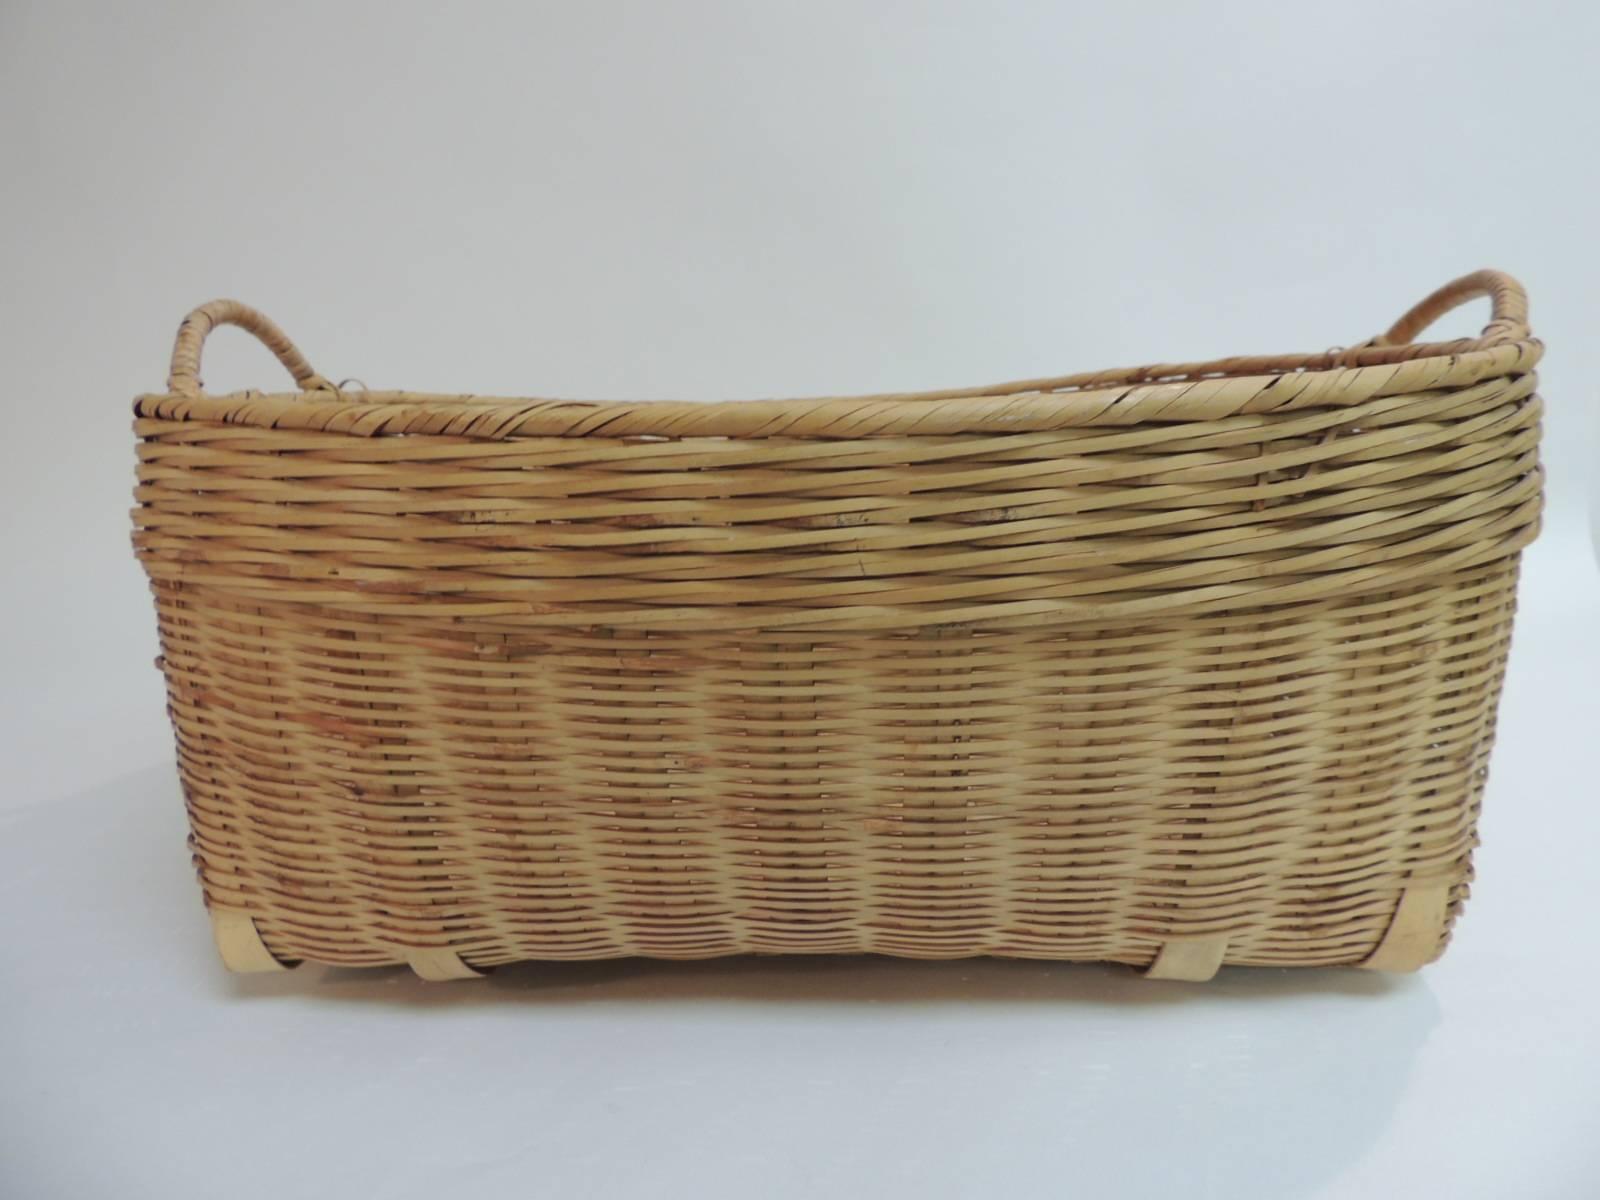 Hand-Woven American Country Oval Large Wicker Woven Basket